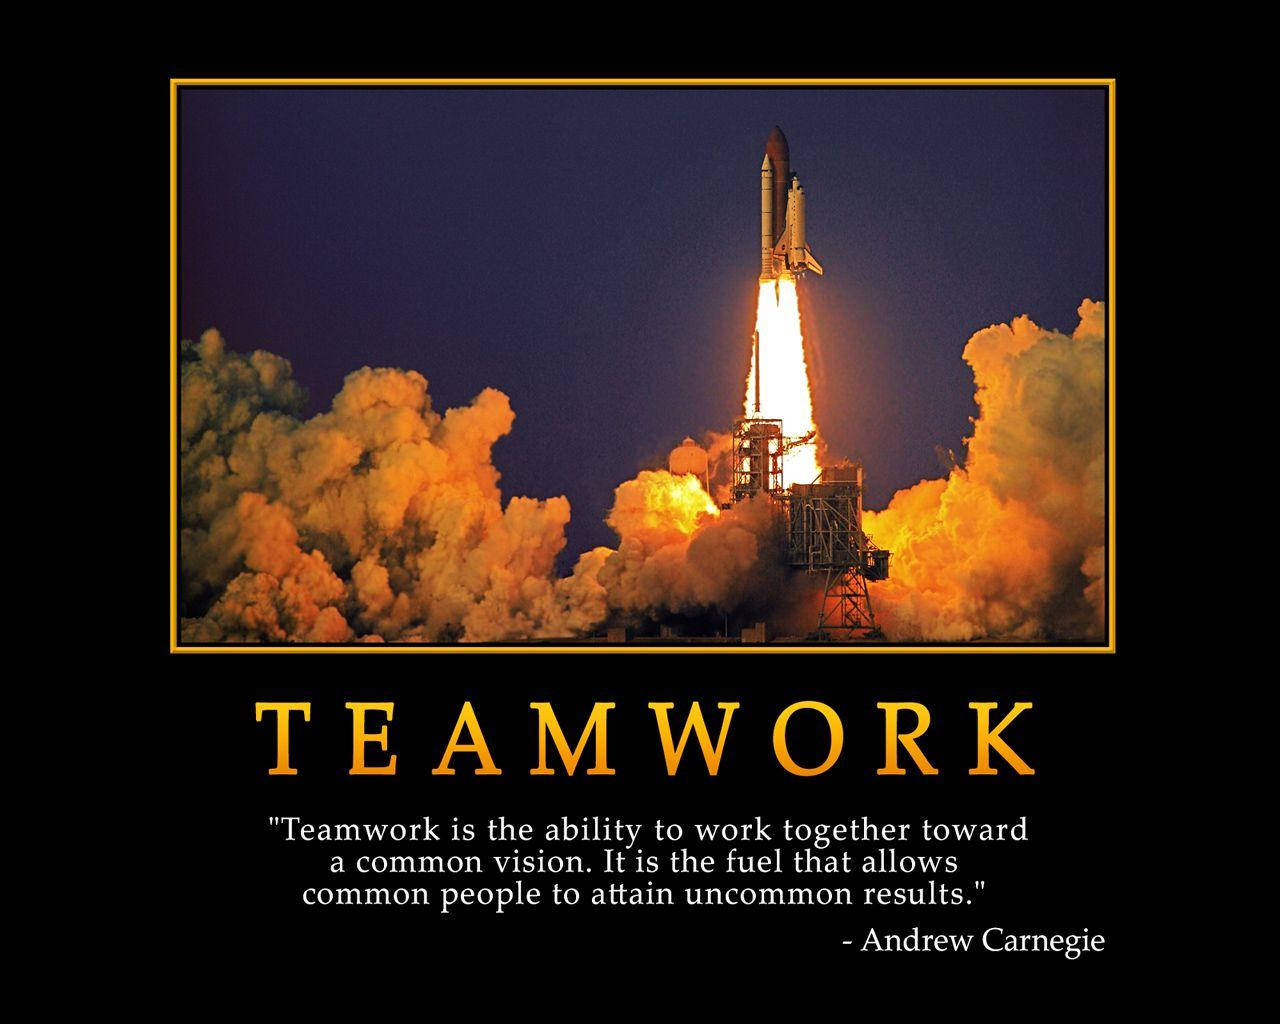 Teamwork Definition Andrew Carnegie Quote Rocket Launch